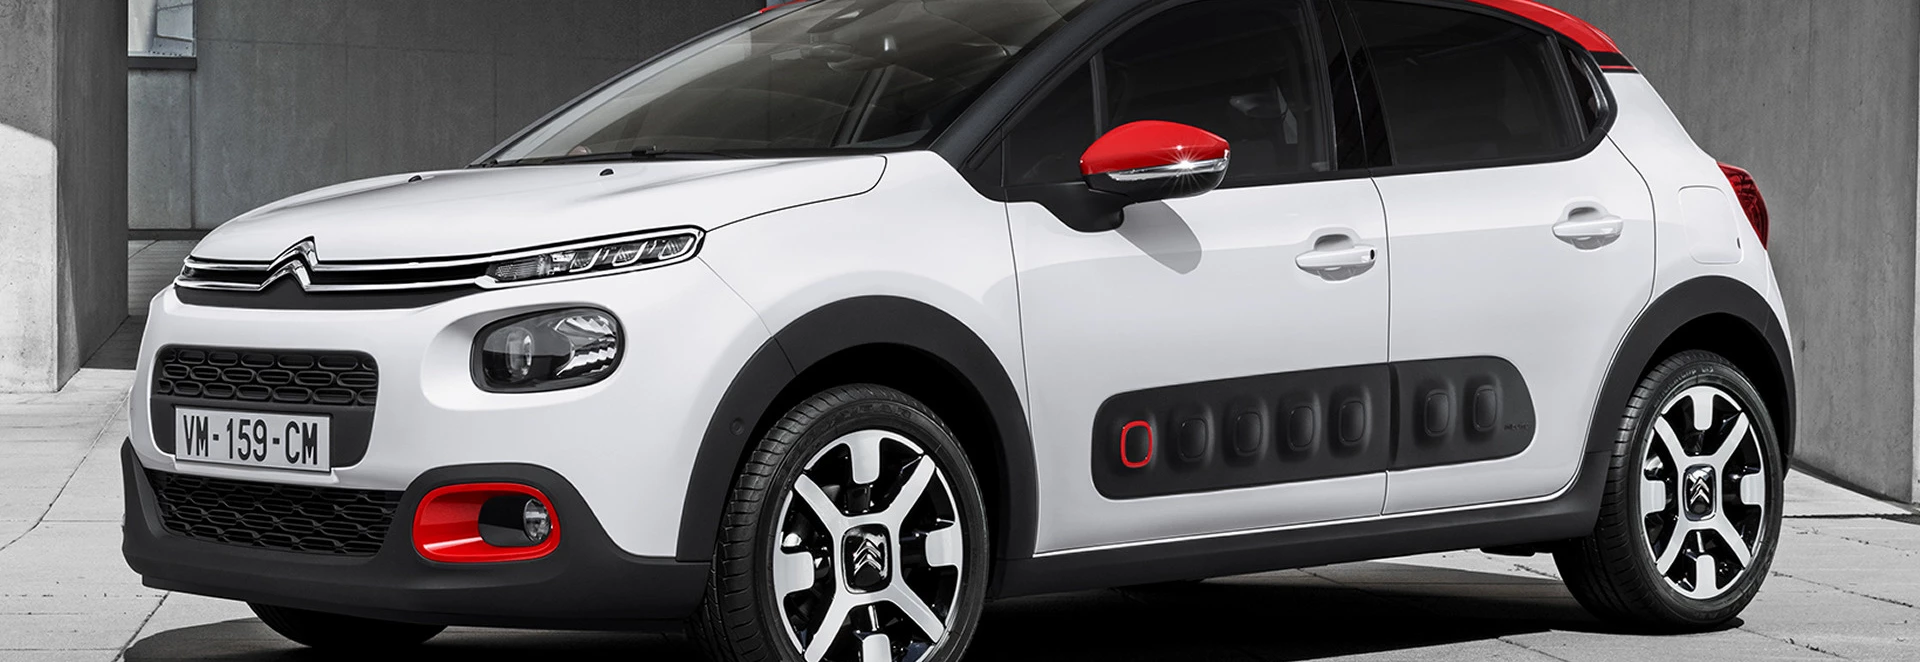 Bold new Citroen C3 unveiled, with just a pinch of Cactus